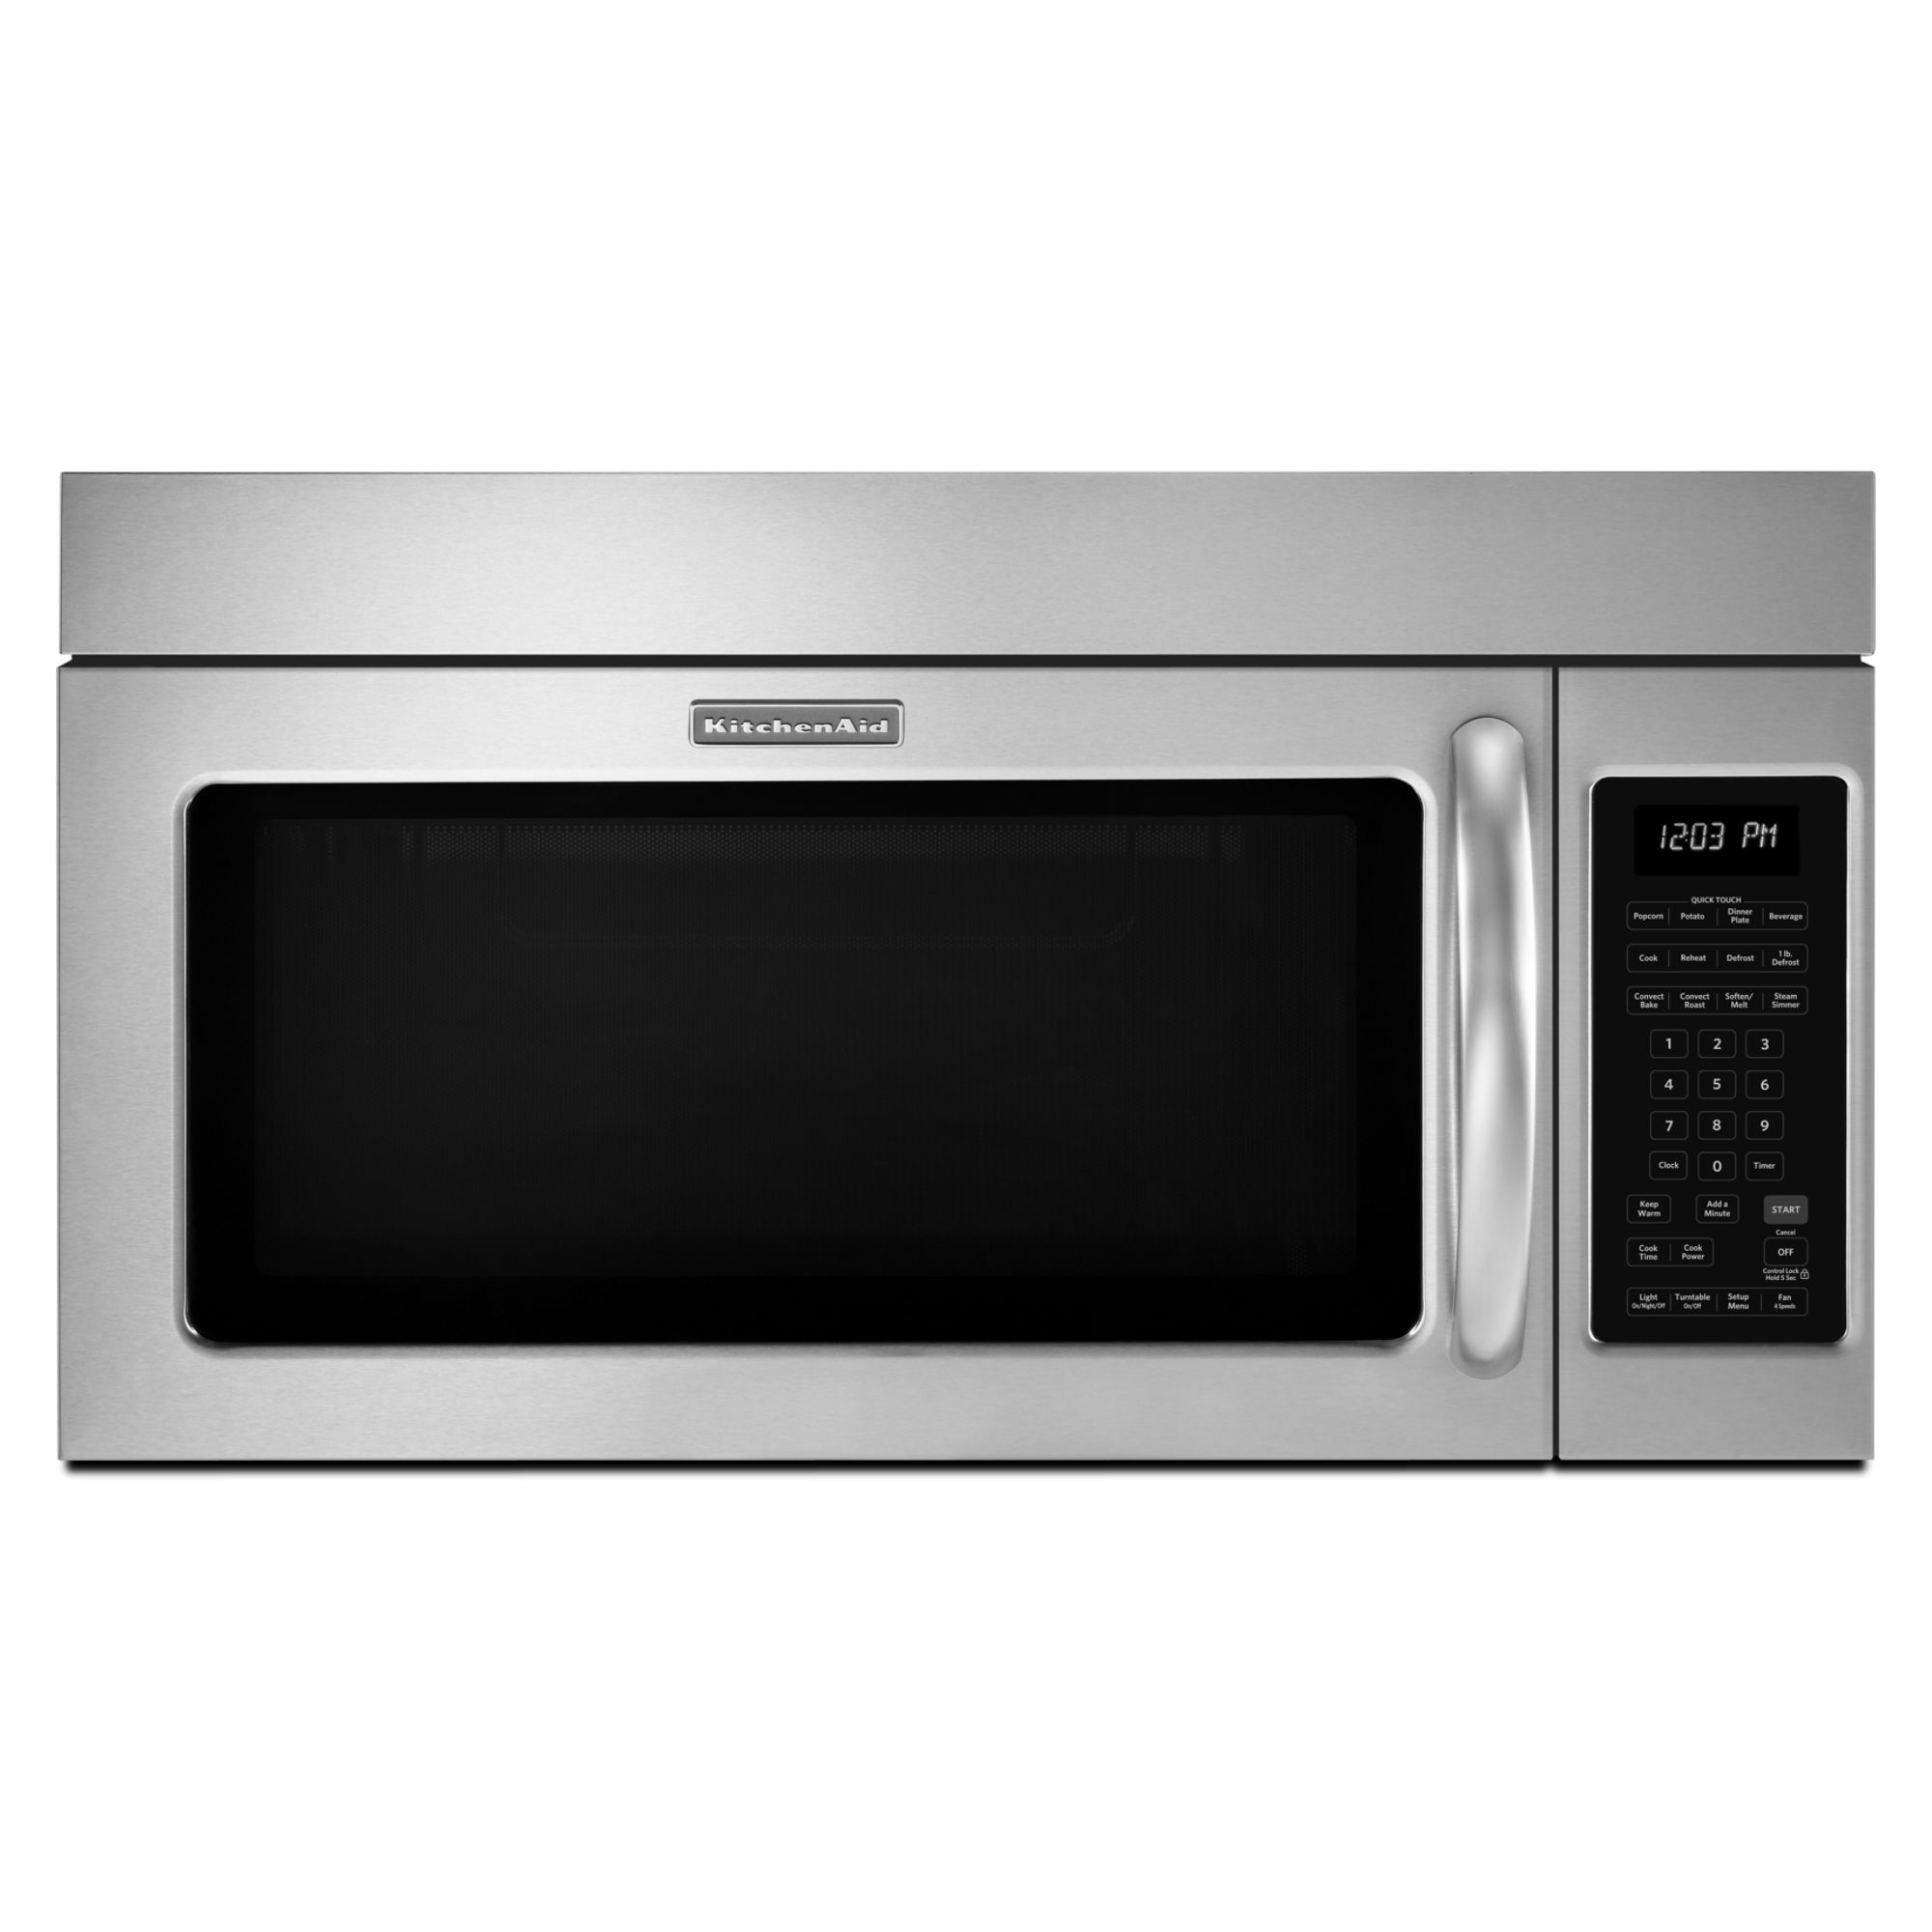 KitchenAid 1.8 cu. ft. Microwave Hood Combination Oven w/ Convection Cooking - Stainless Steel